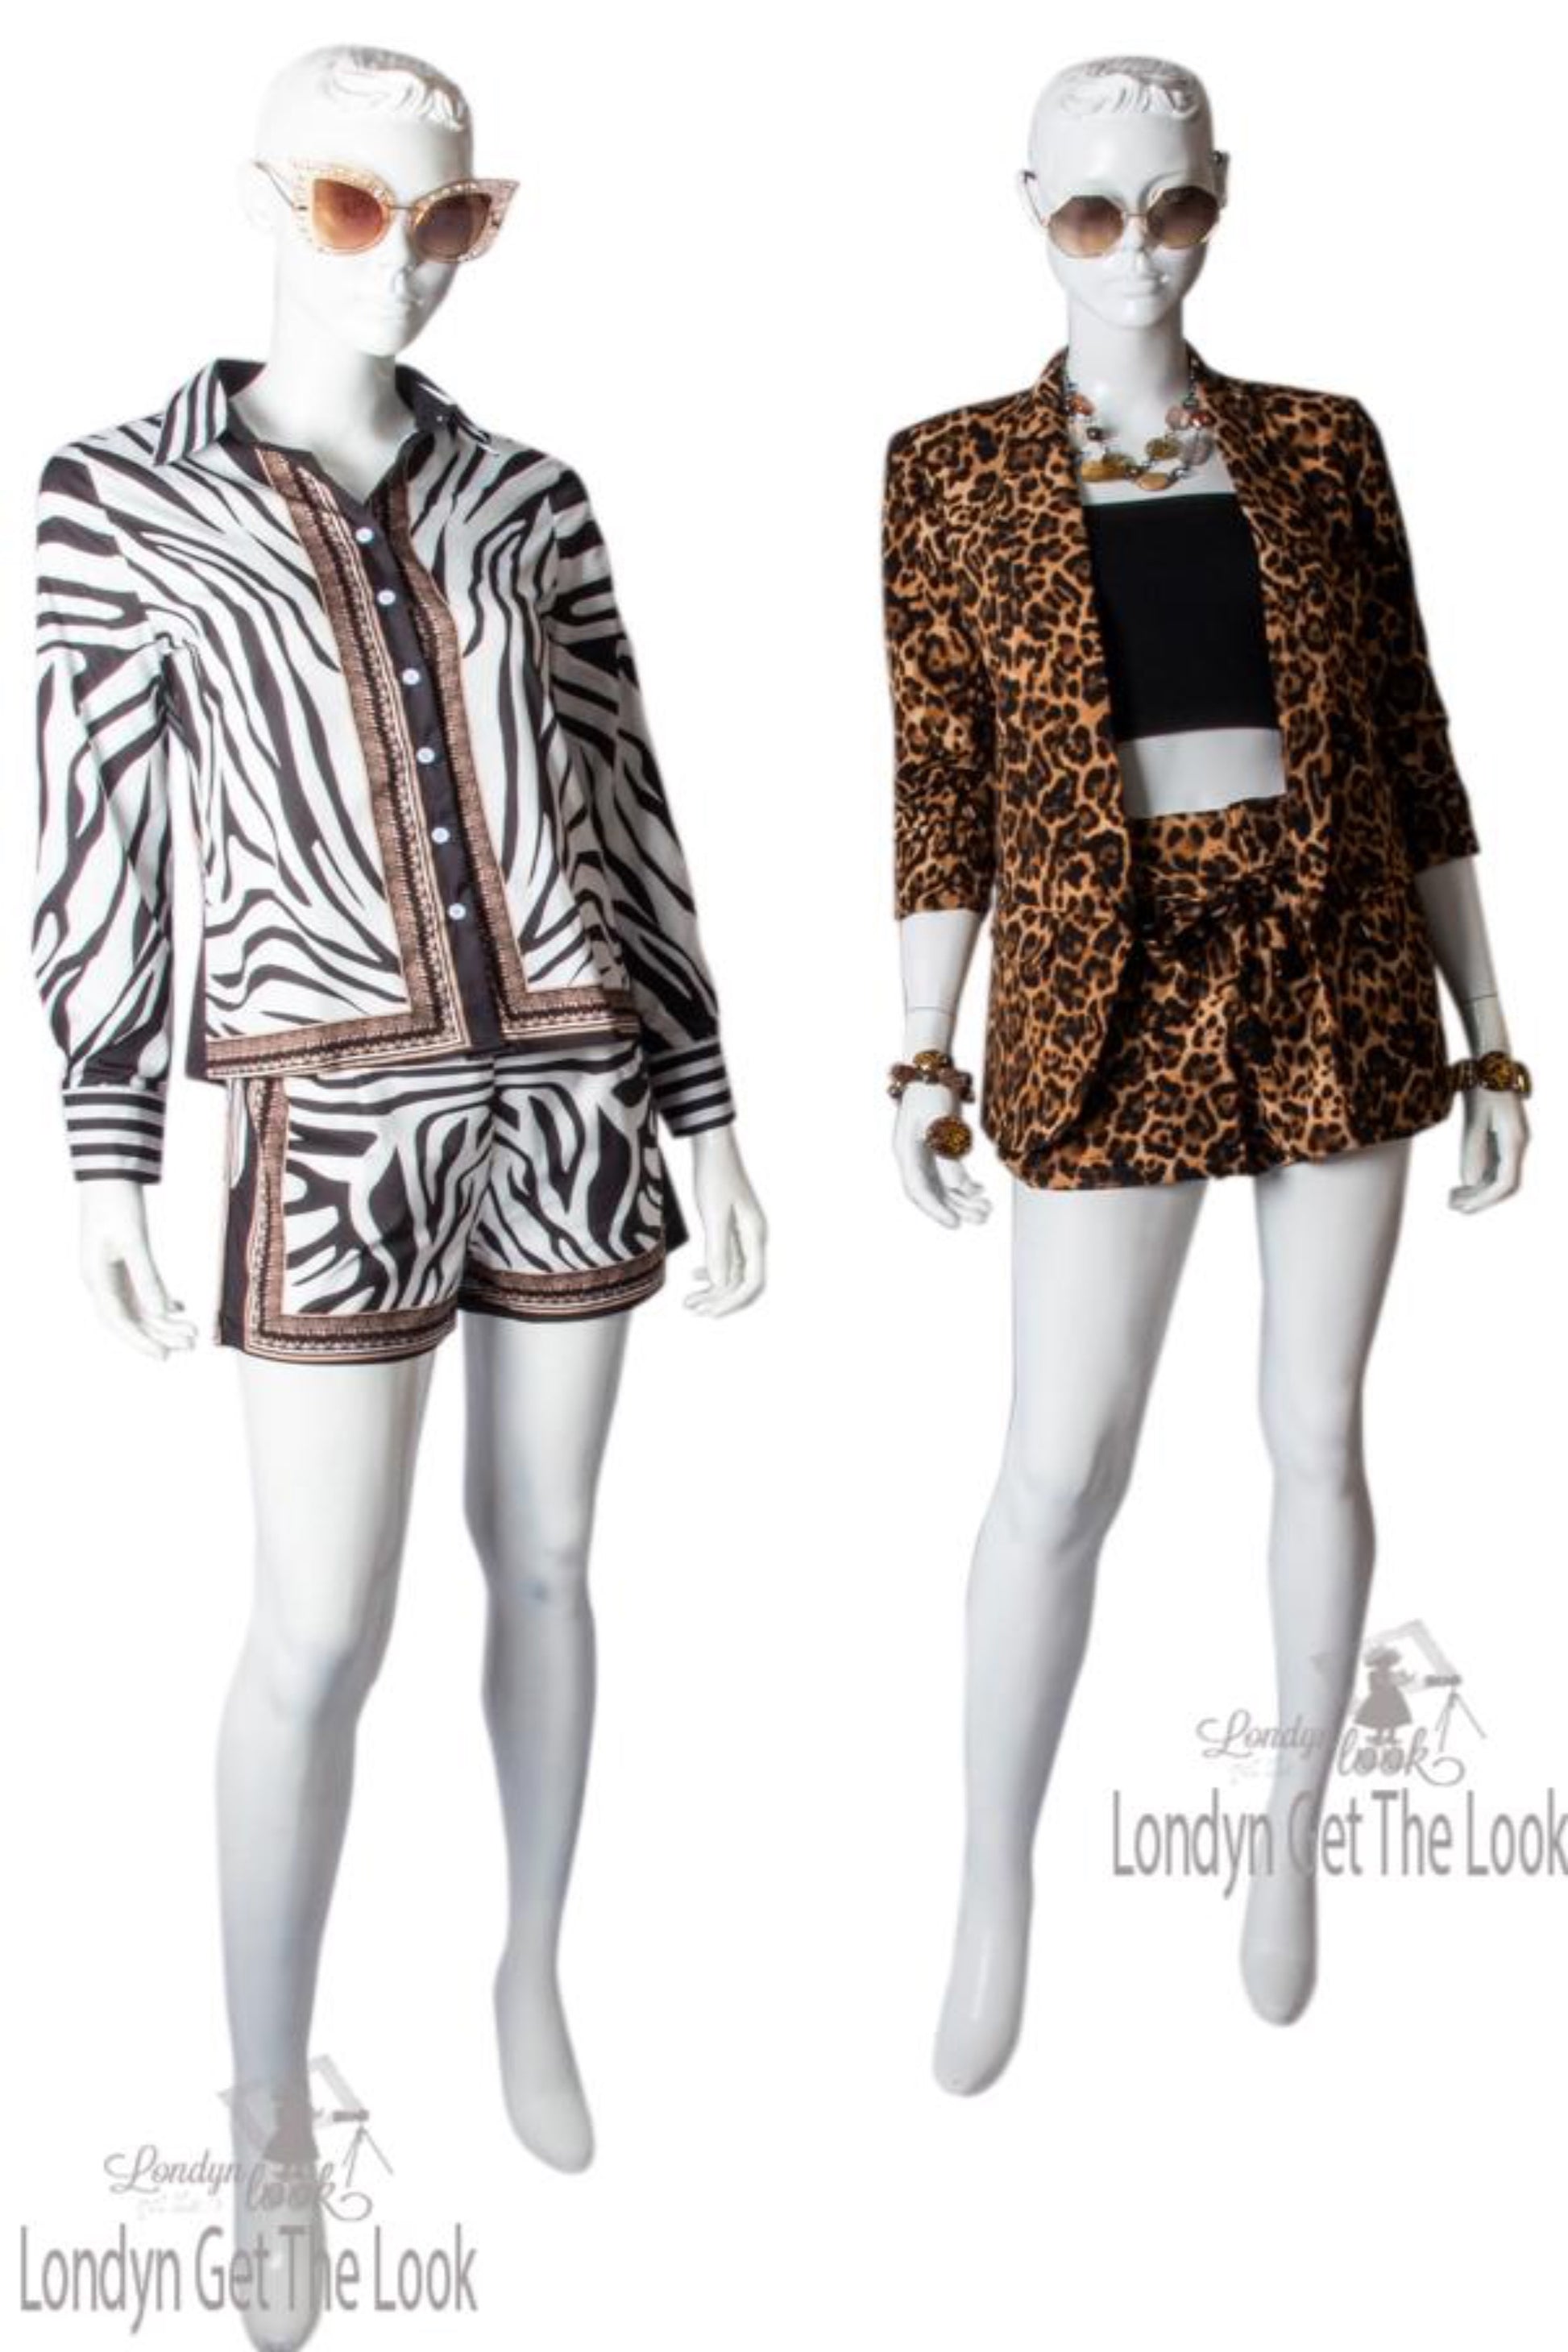 Zebra Print Buttoned Shirt & Zipper Short Sets long sleeve with brown/gold border v-neck turn-down collar paired with a matching shorts Very chic and sexy above knee mini shorts and side pocket 